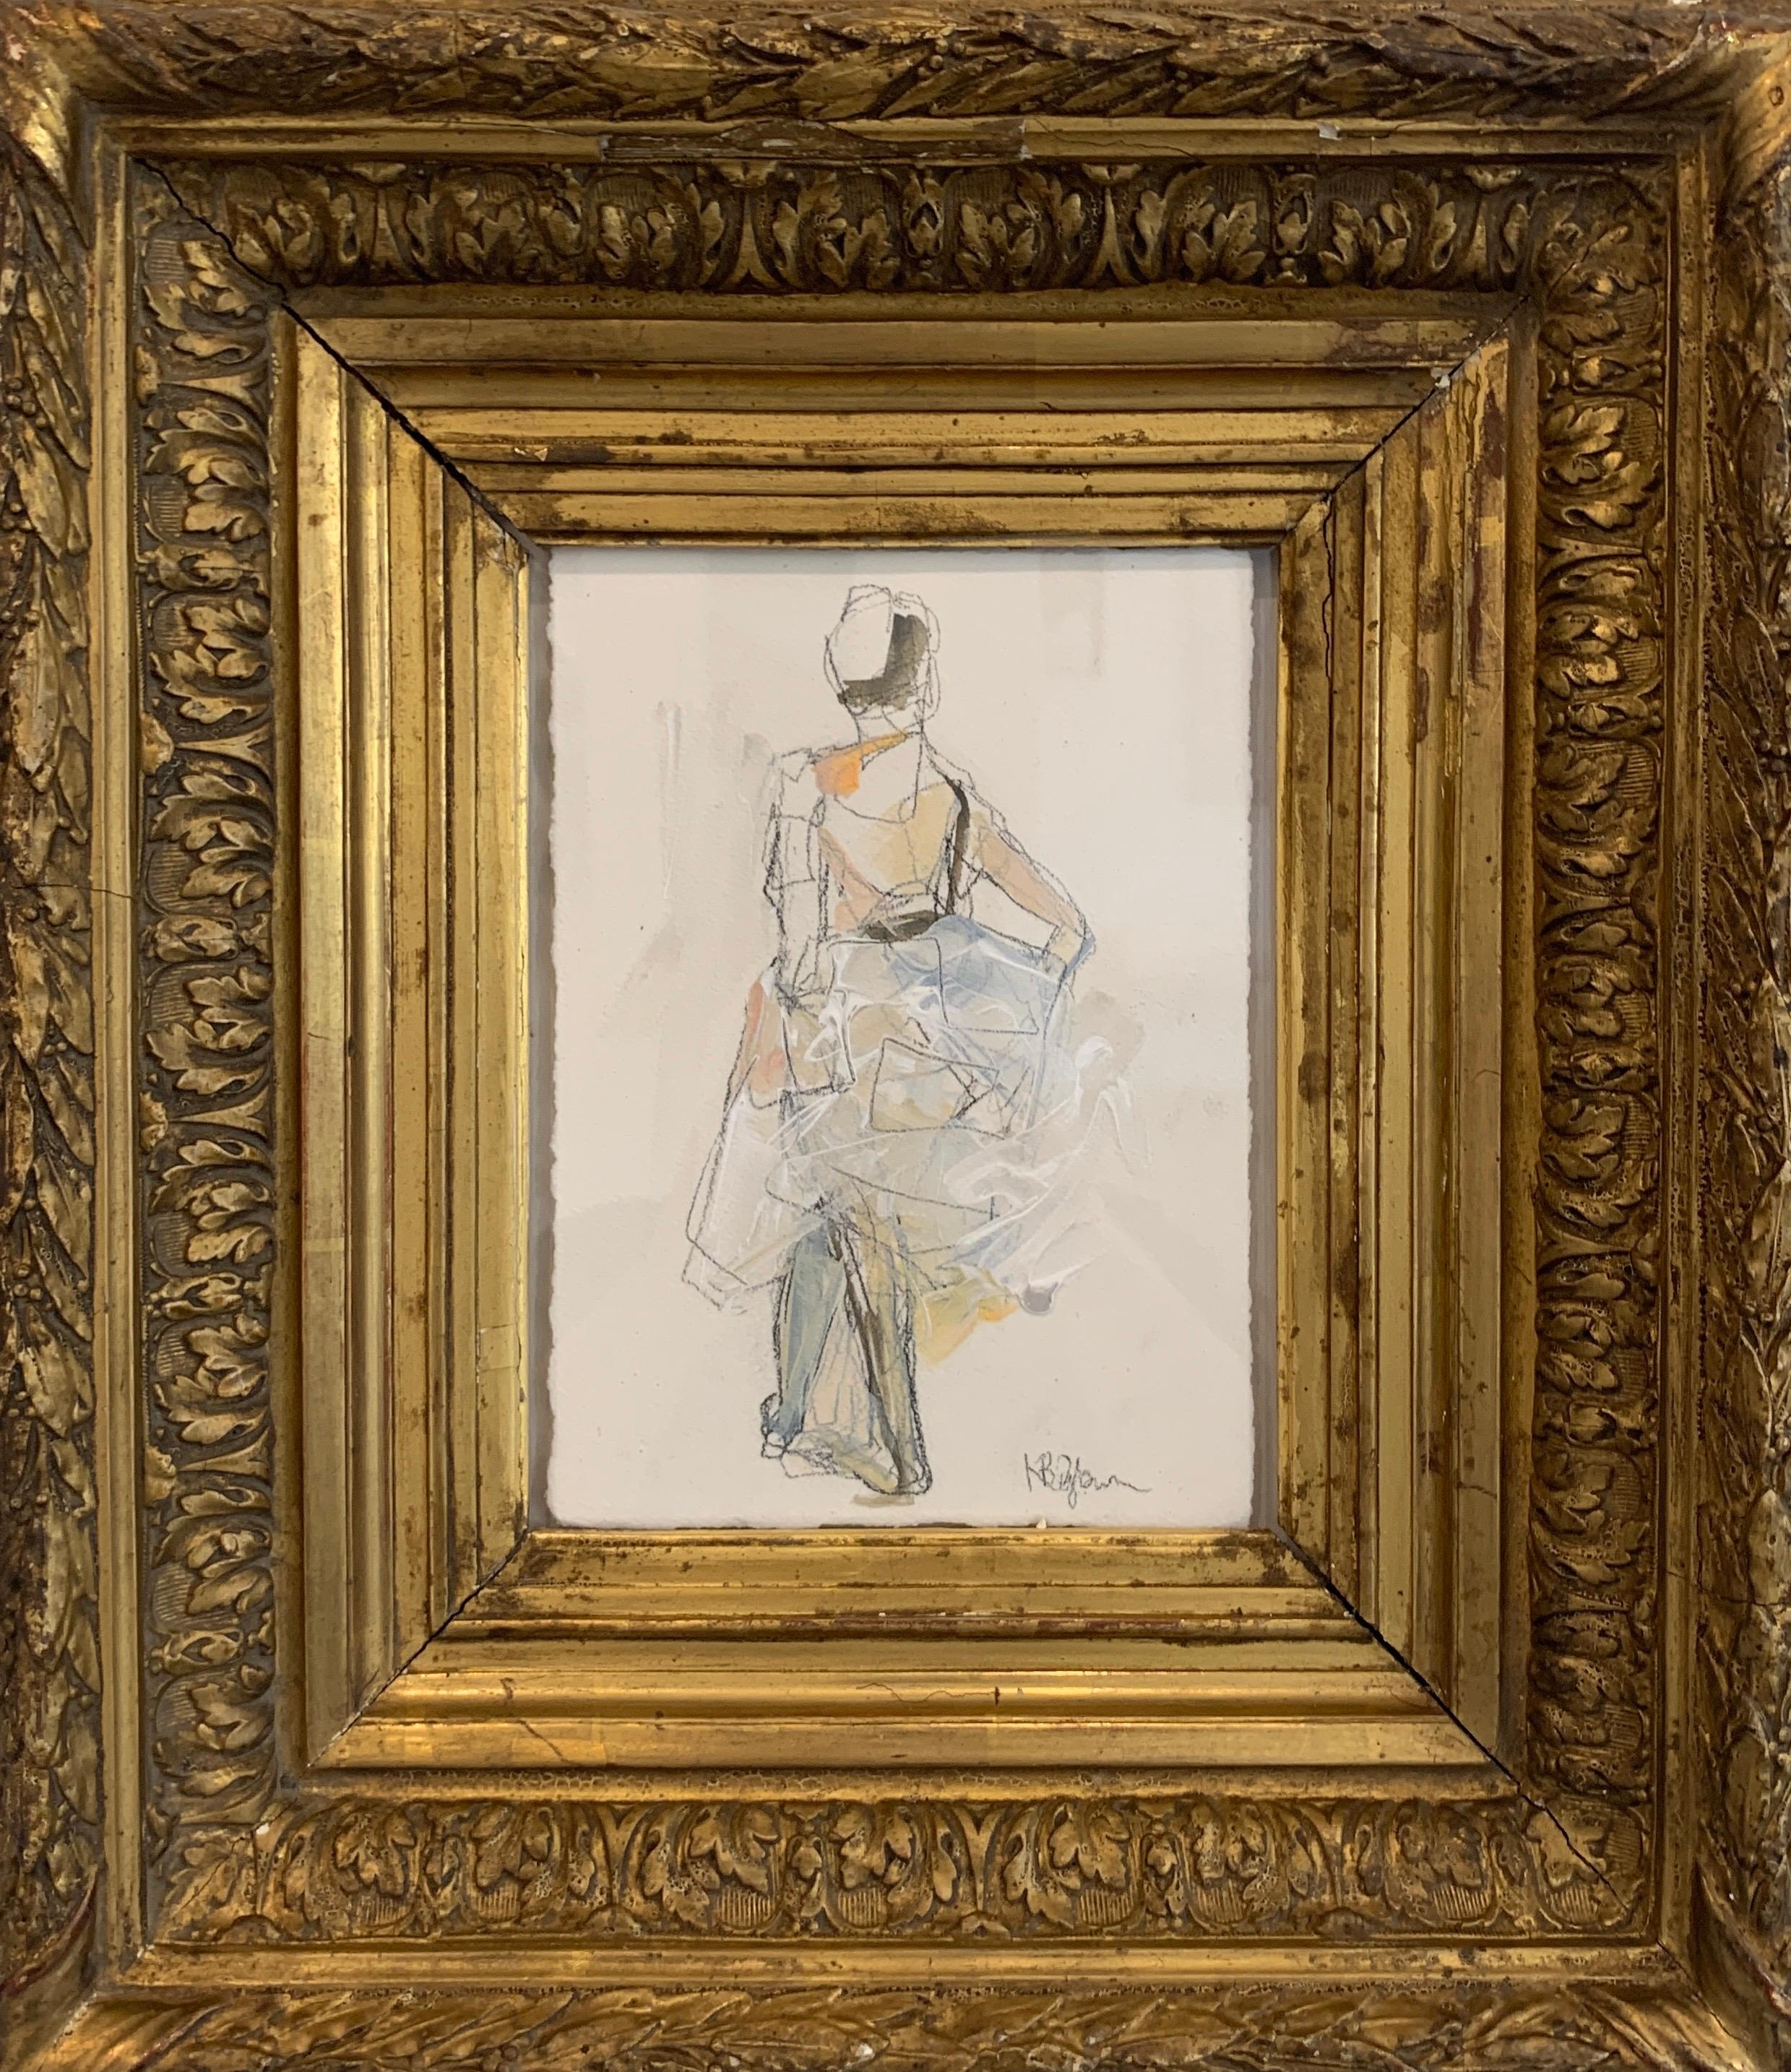 Kelley B. Ogburn Figurative Painting - Dancer #2 by Kelley Ogburn Small Ballerina Painting on paper in Antique Frame